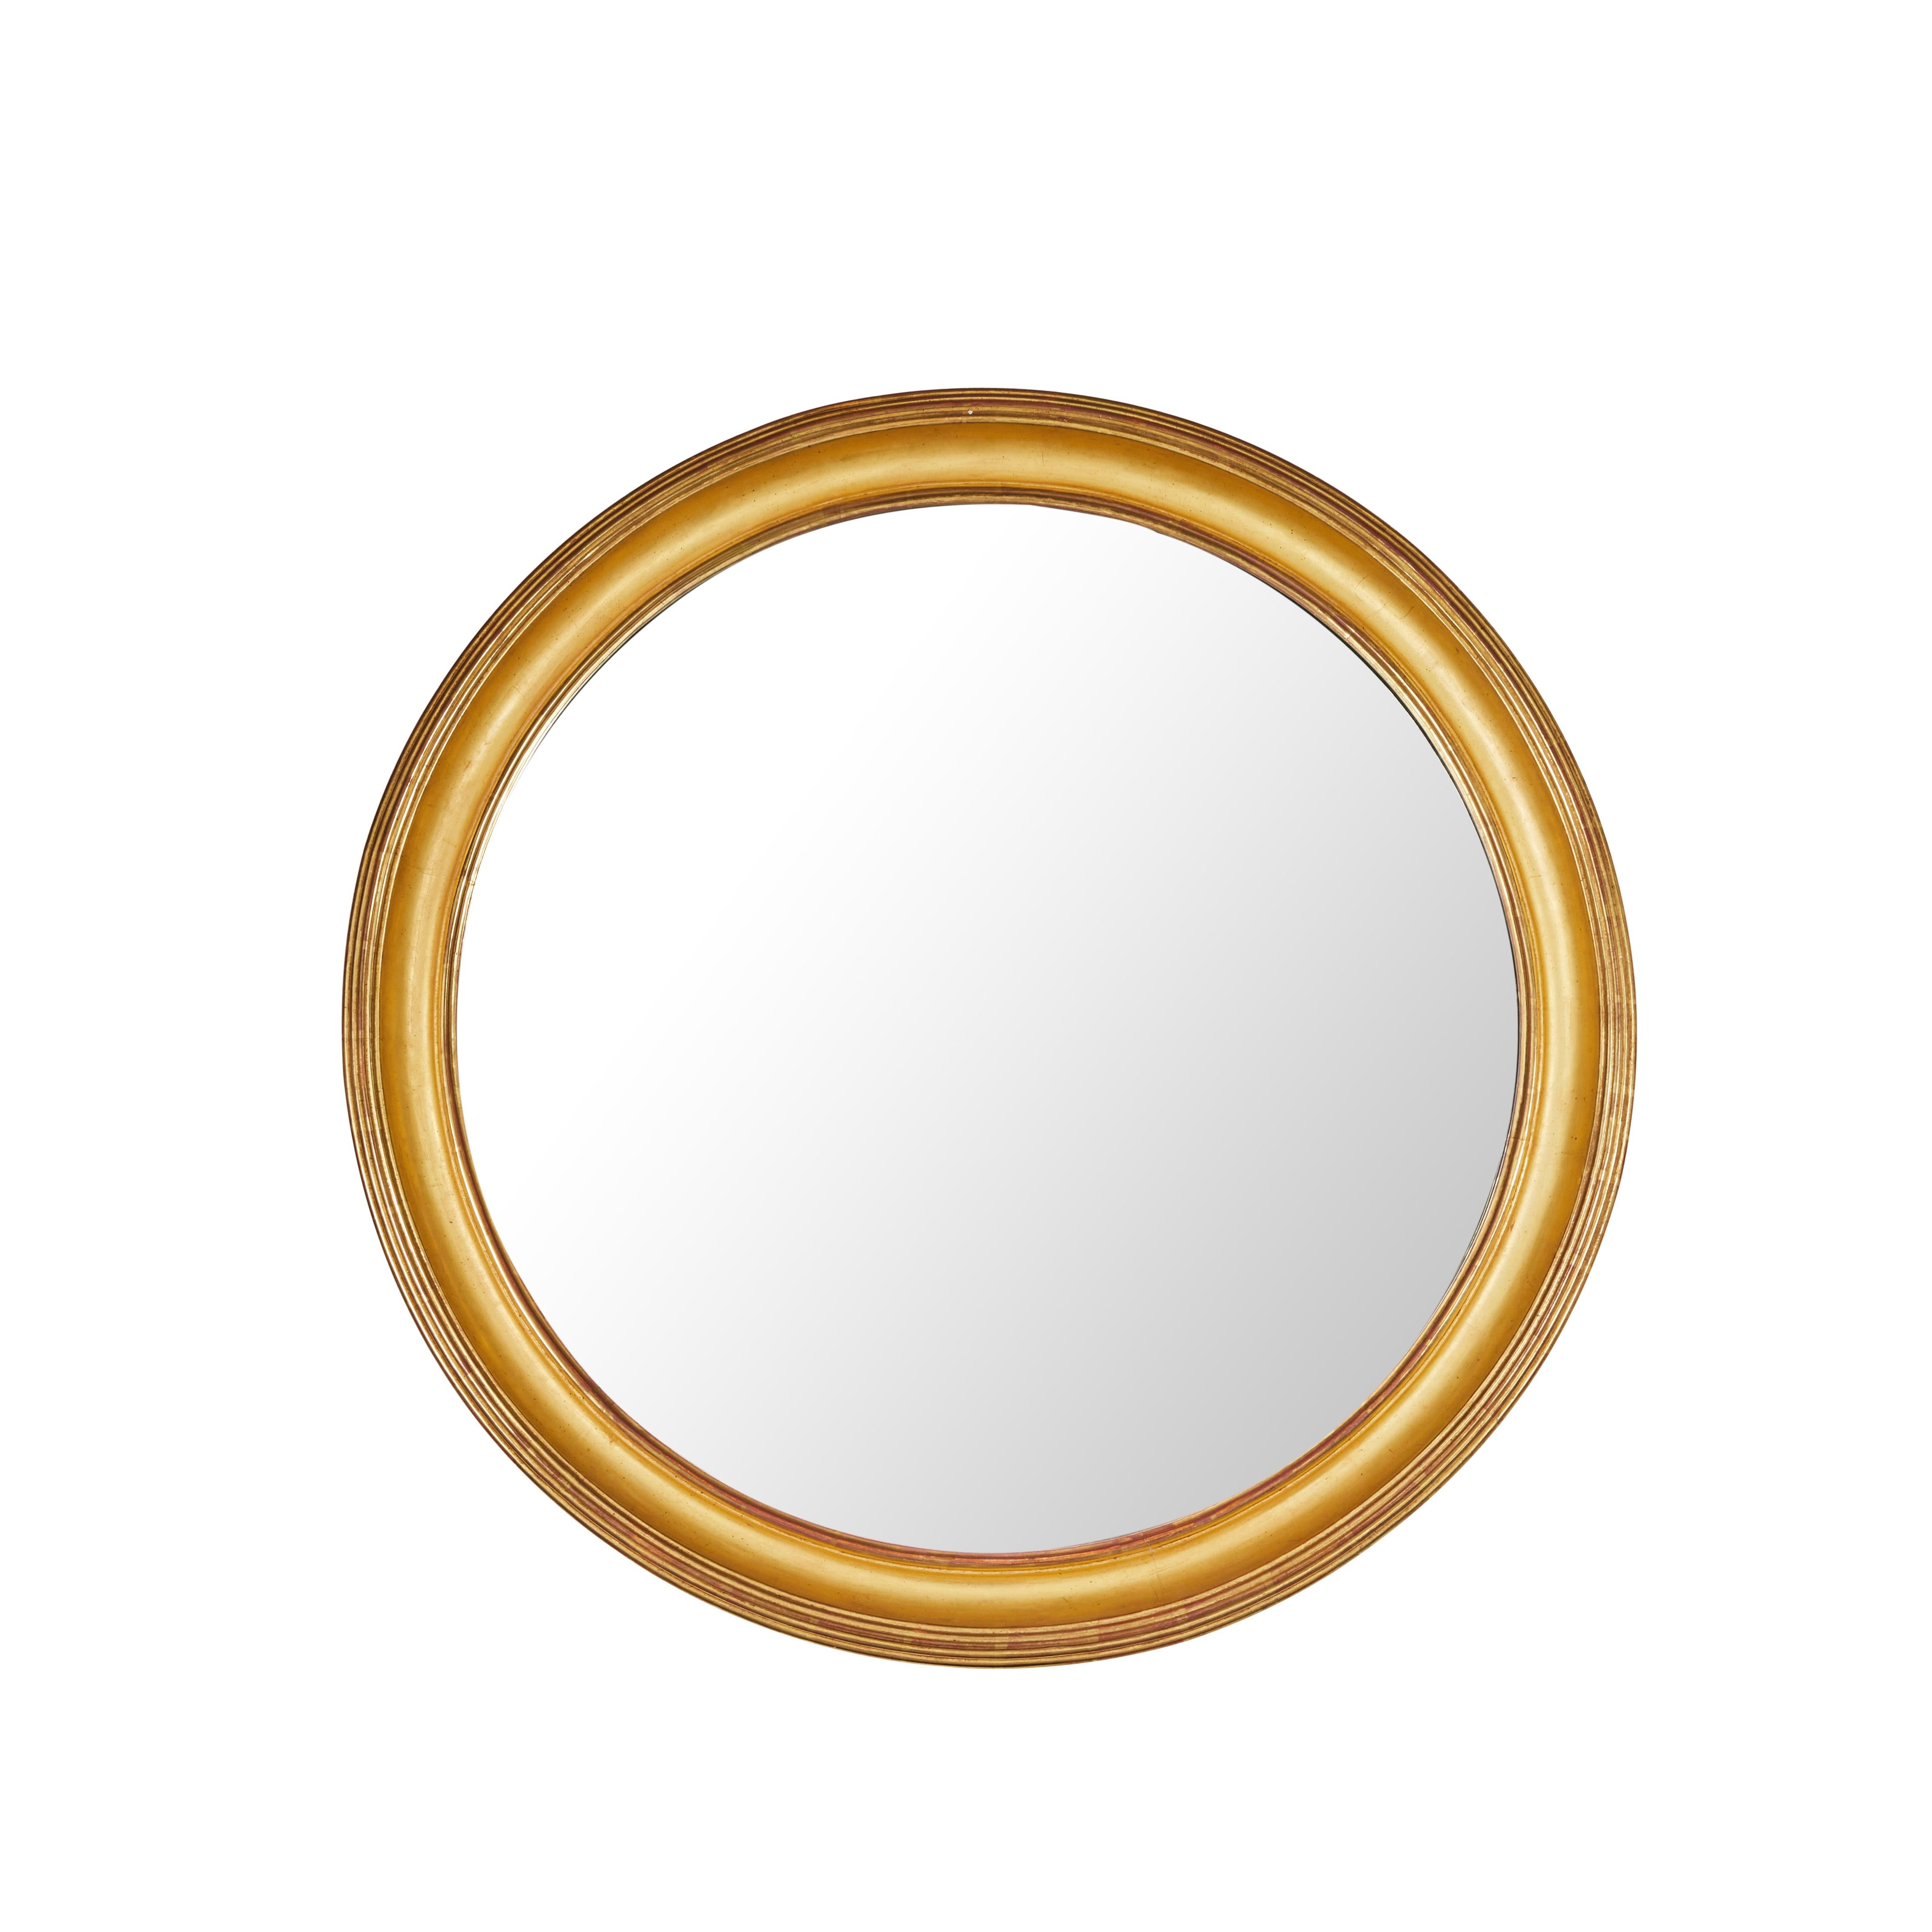 A grand-scale, circular, hand-carved, gessoed, and 22k gold gilded frame, inset with newer mirror glass. Each with ridged edges surrounding a convex interior.  Sold separately.
